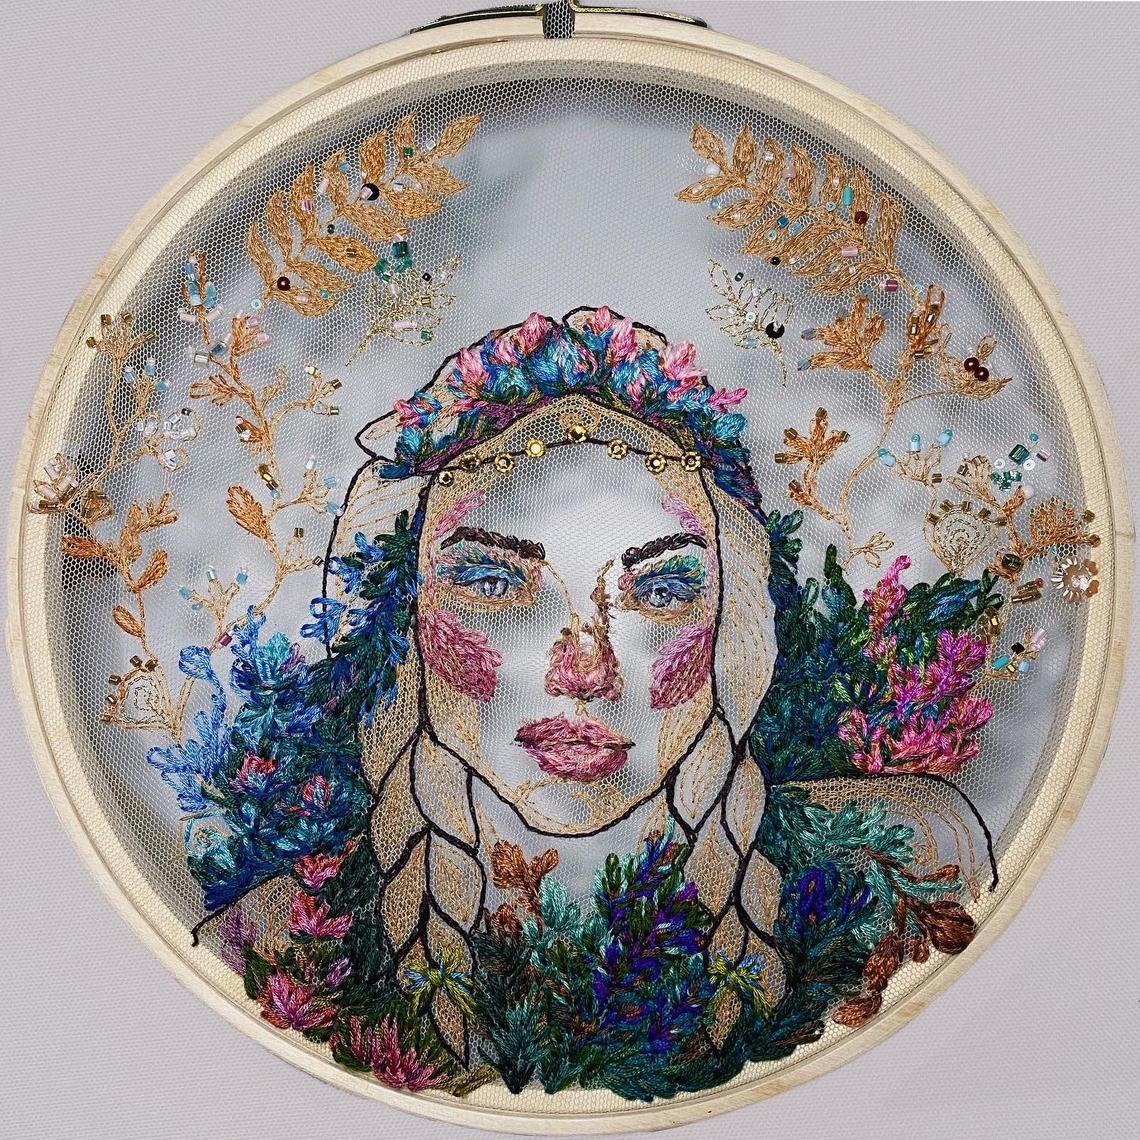 Extraordinary Embroidered Portraits And Illustrations By Katerina Marchenko 2